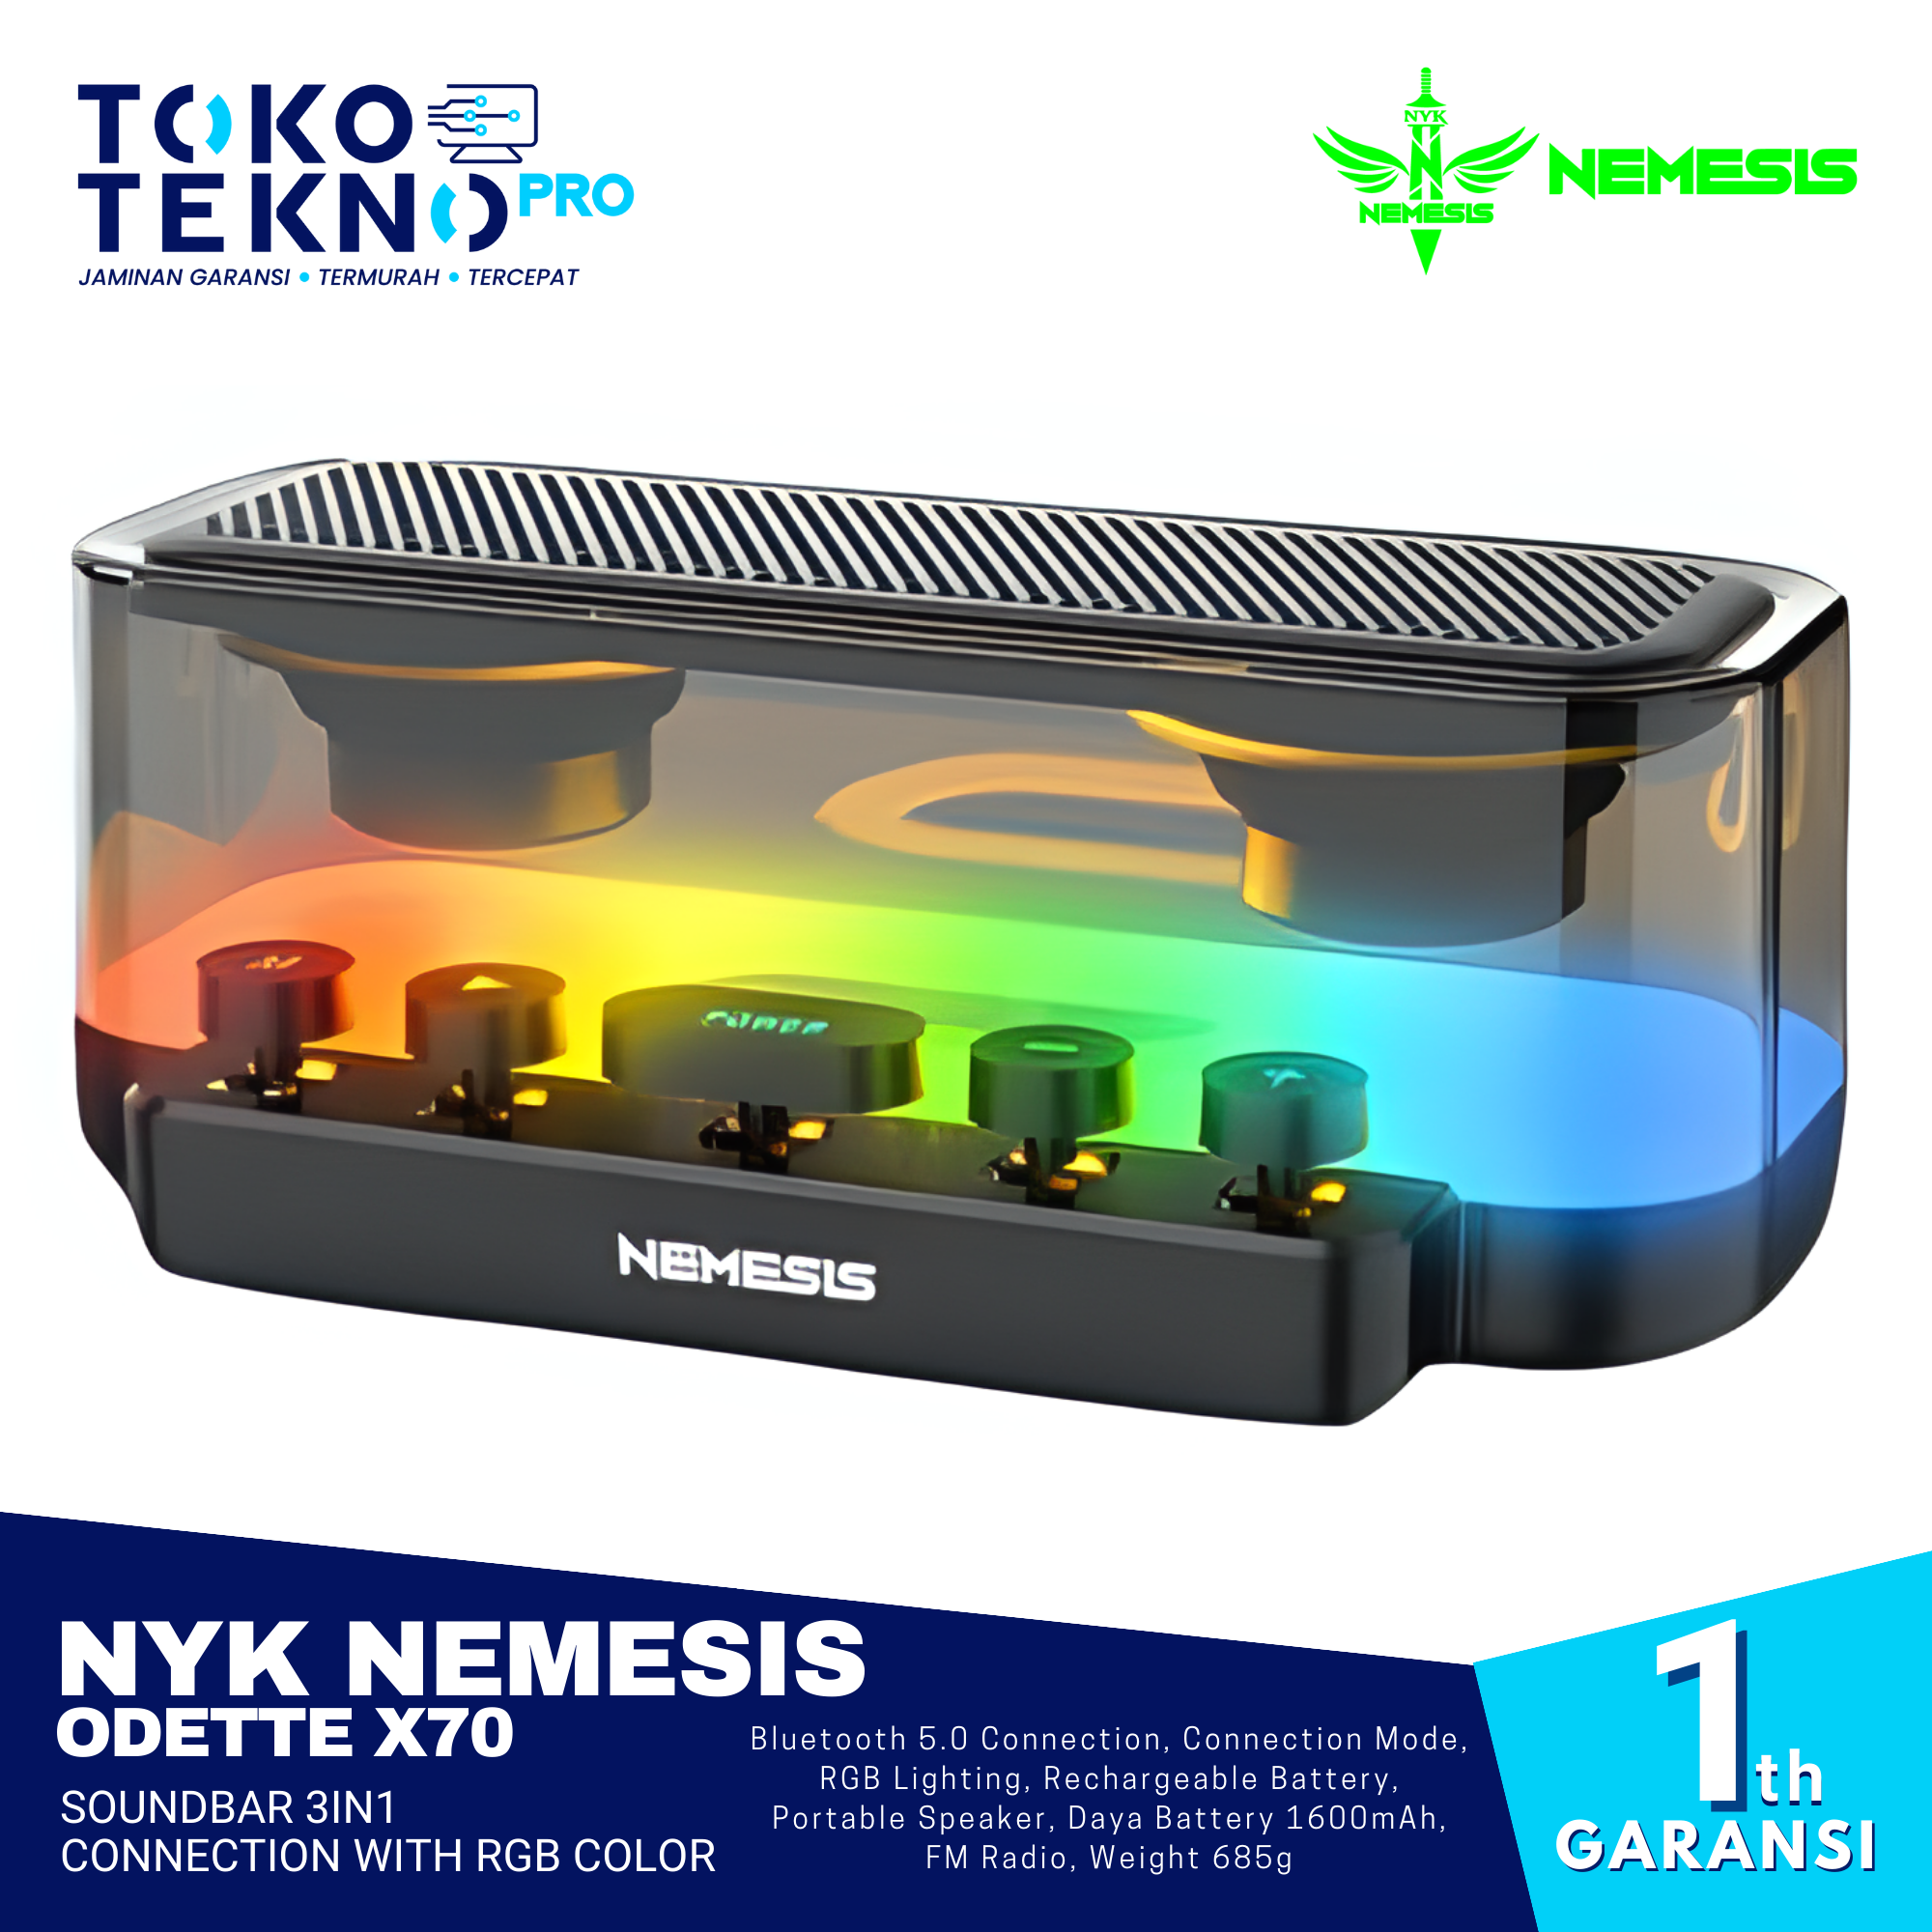 NYK Nemesis Odette X70 Soundbar 3in1 Connection With RGB Color